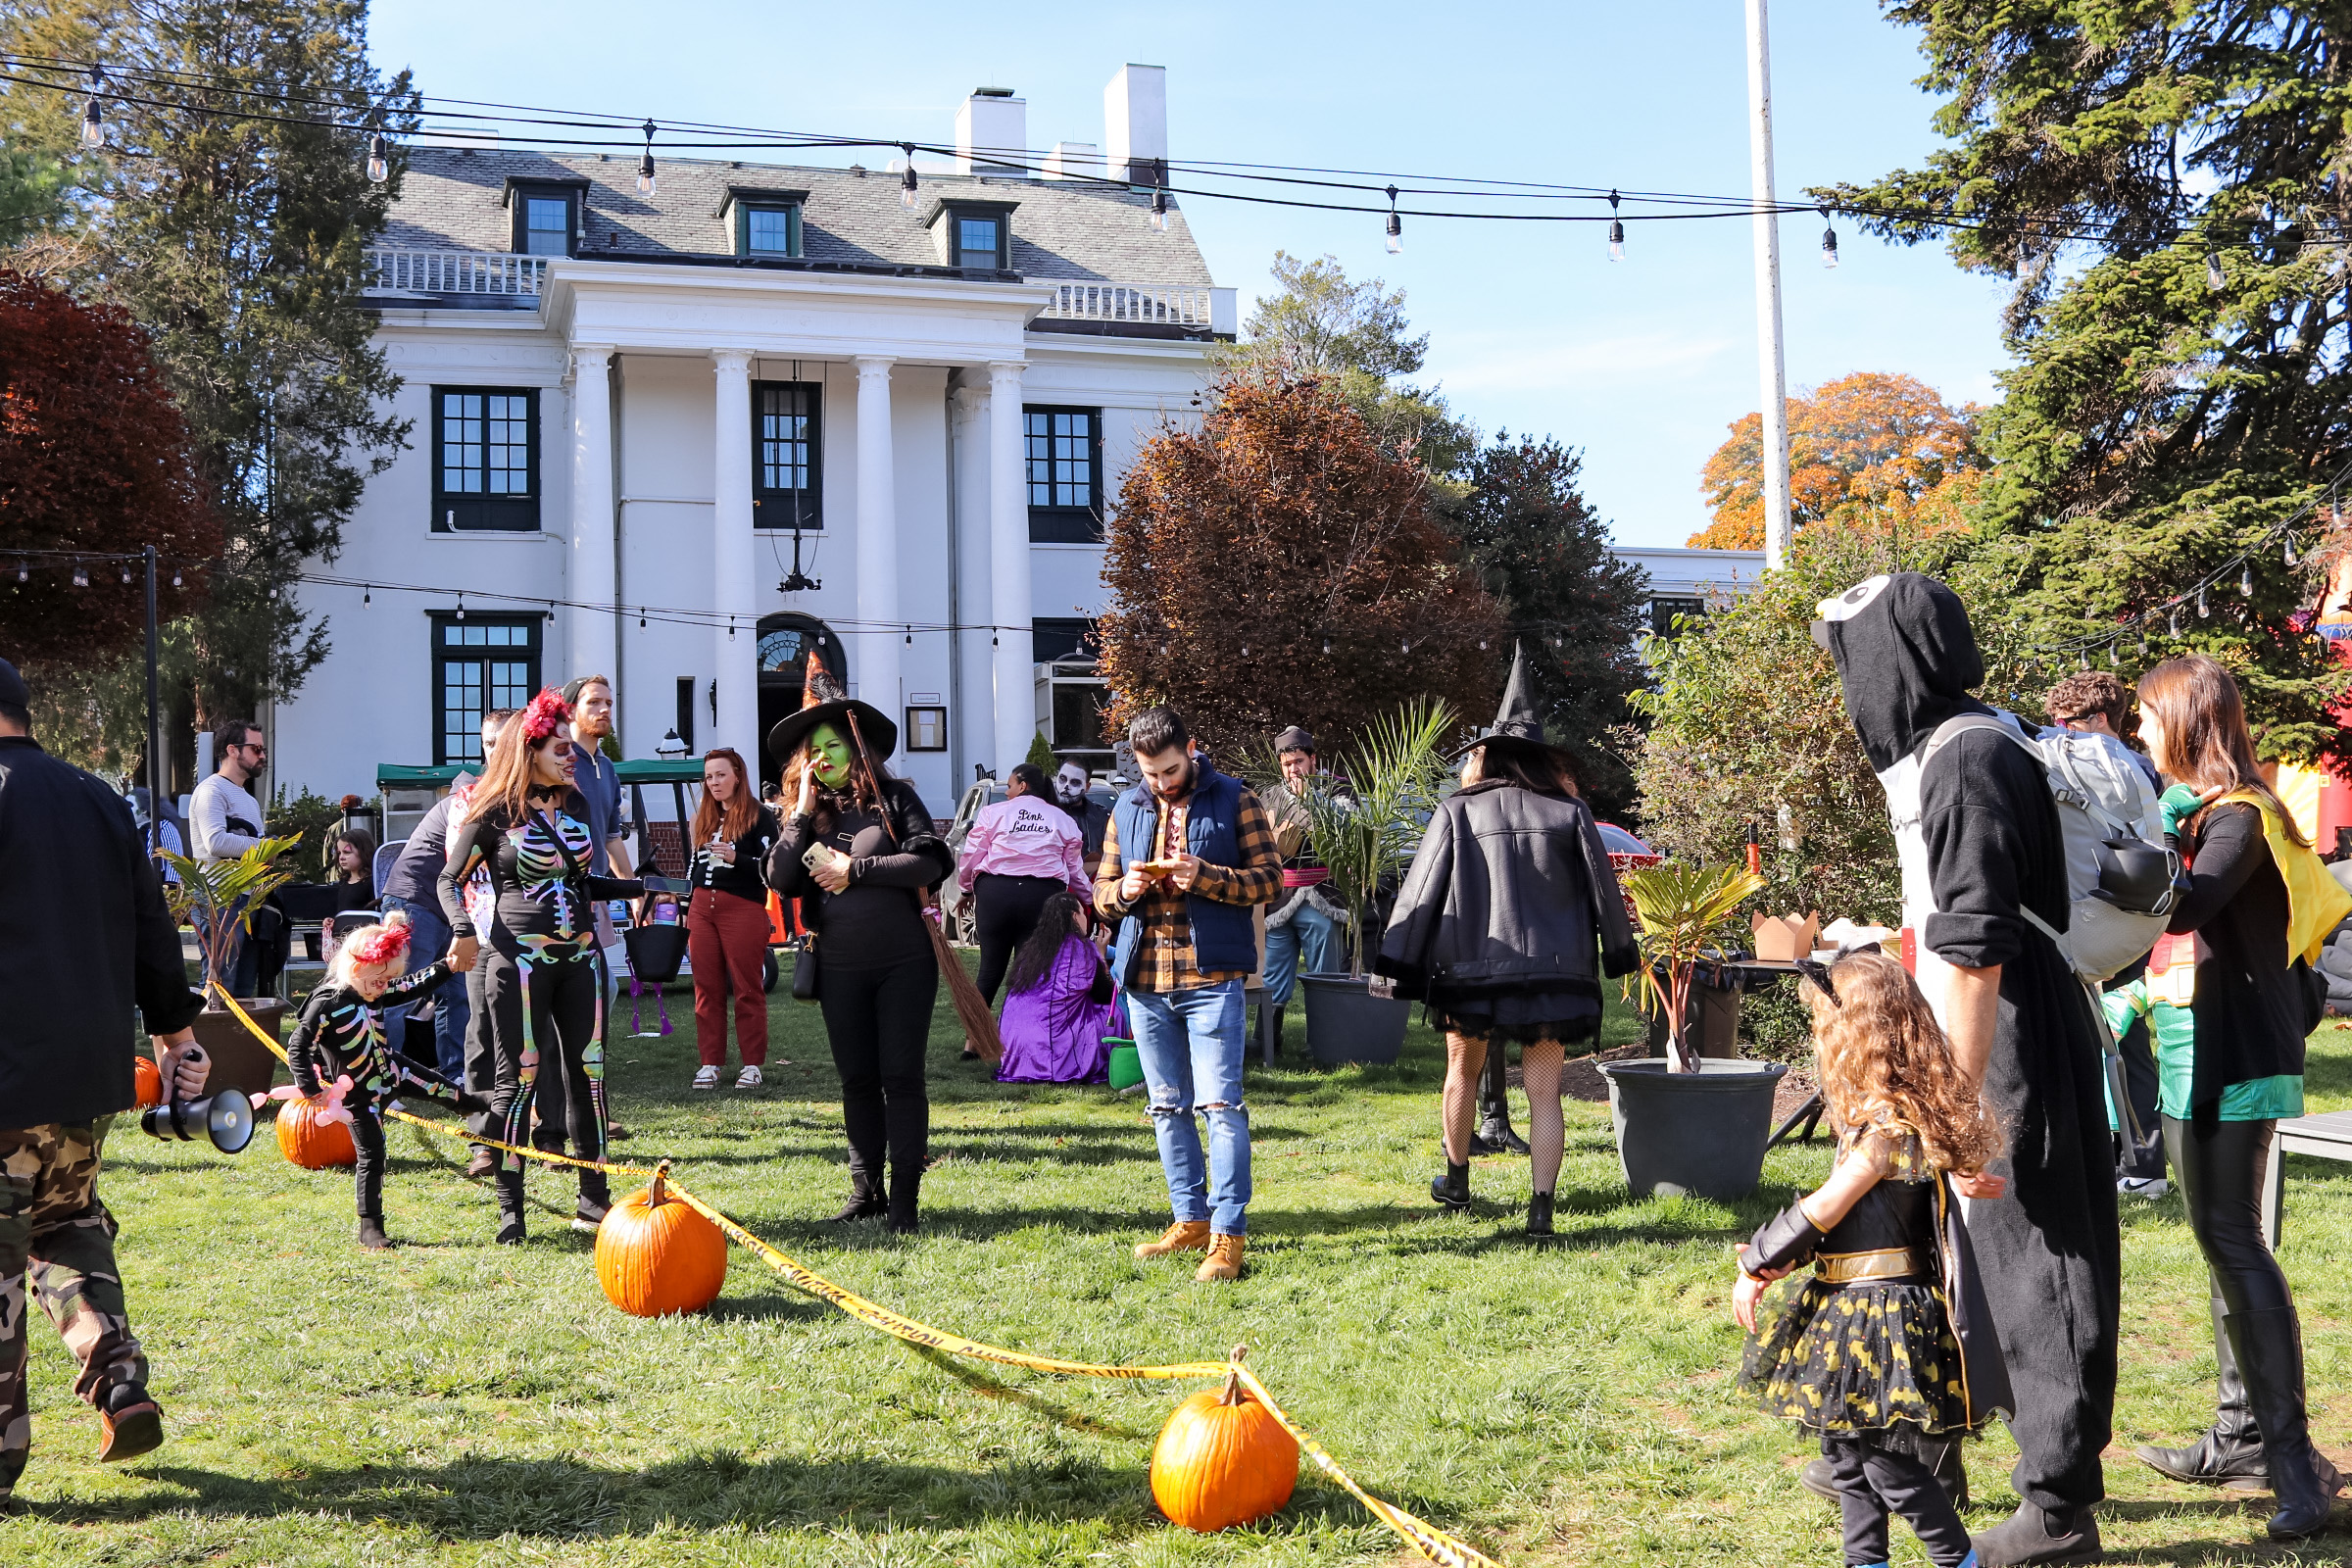 The Best Fall Events 2017 - What To Do: Armonk Bedford Chappaqua